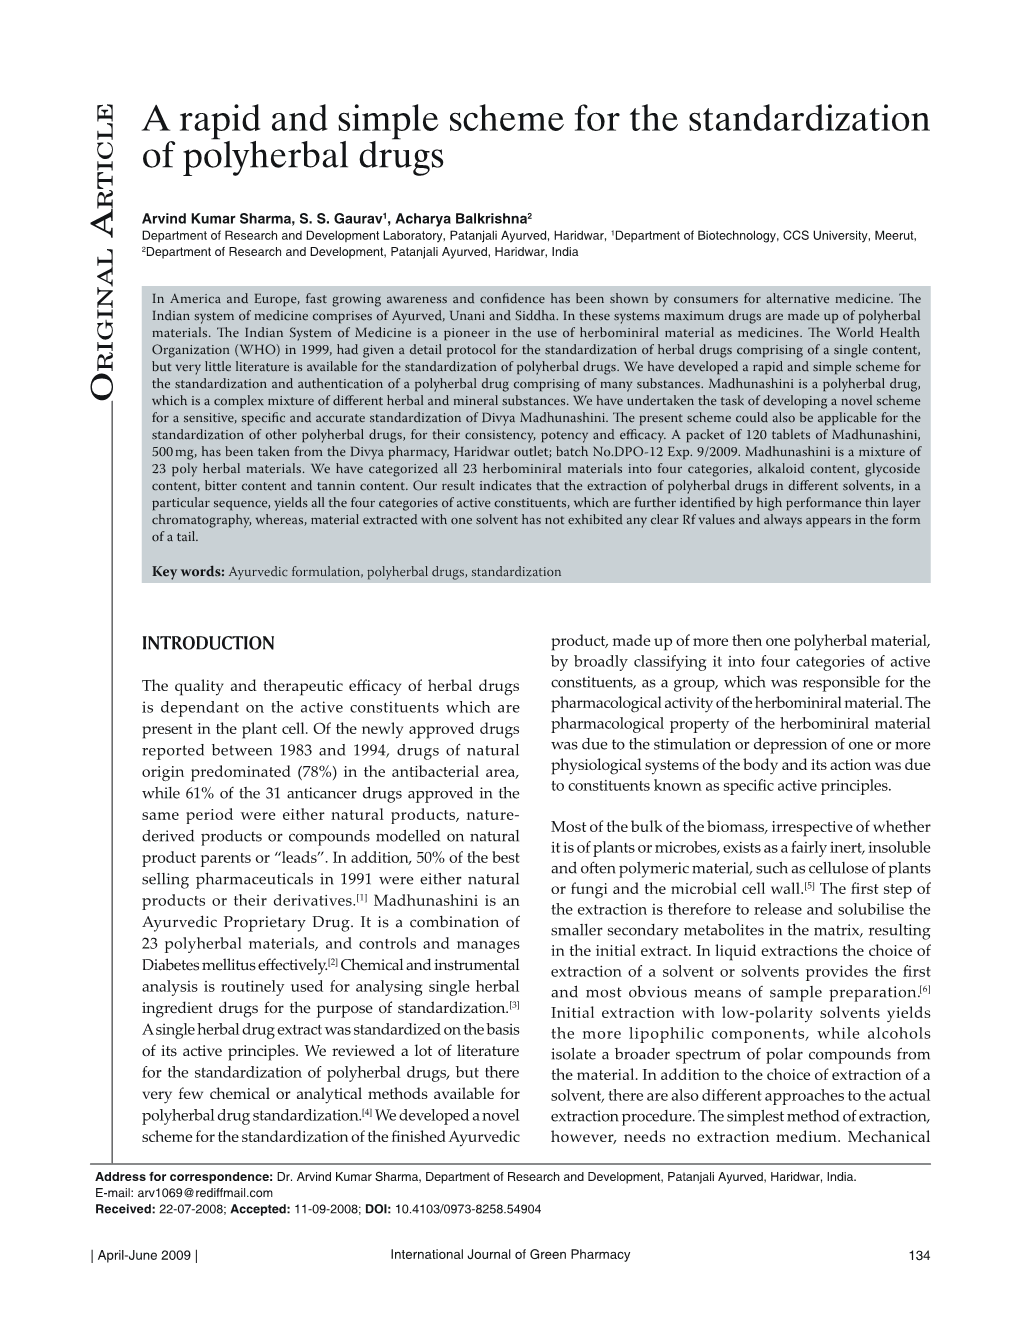 A Rapid and Simple Scheme for the Standardization of Polyherbal Drugs Rticl E Arvind Kumar Sharma, S